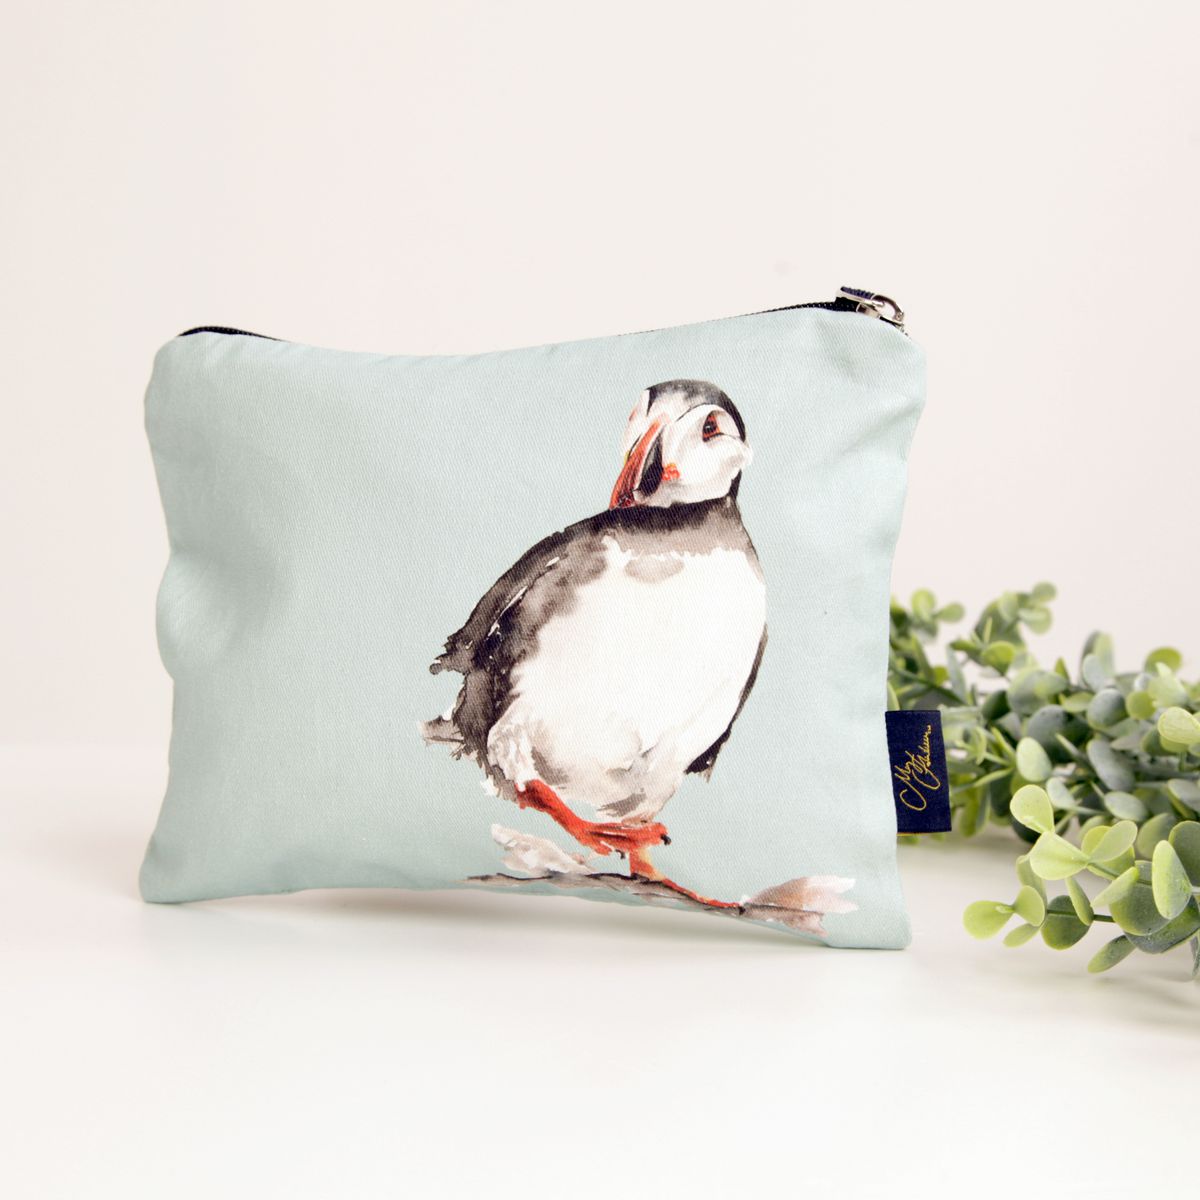 A puffin pillow designed by Meg